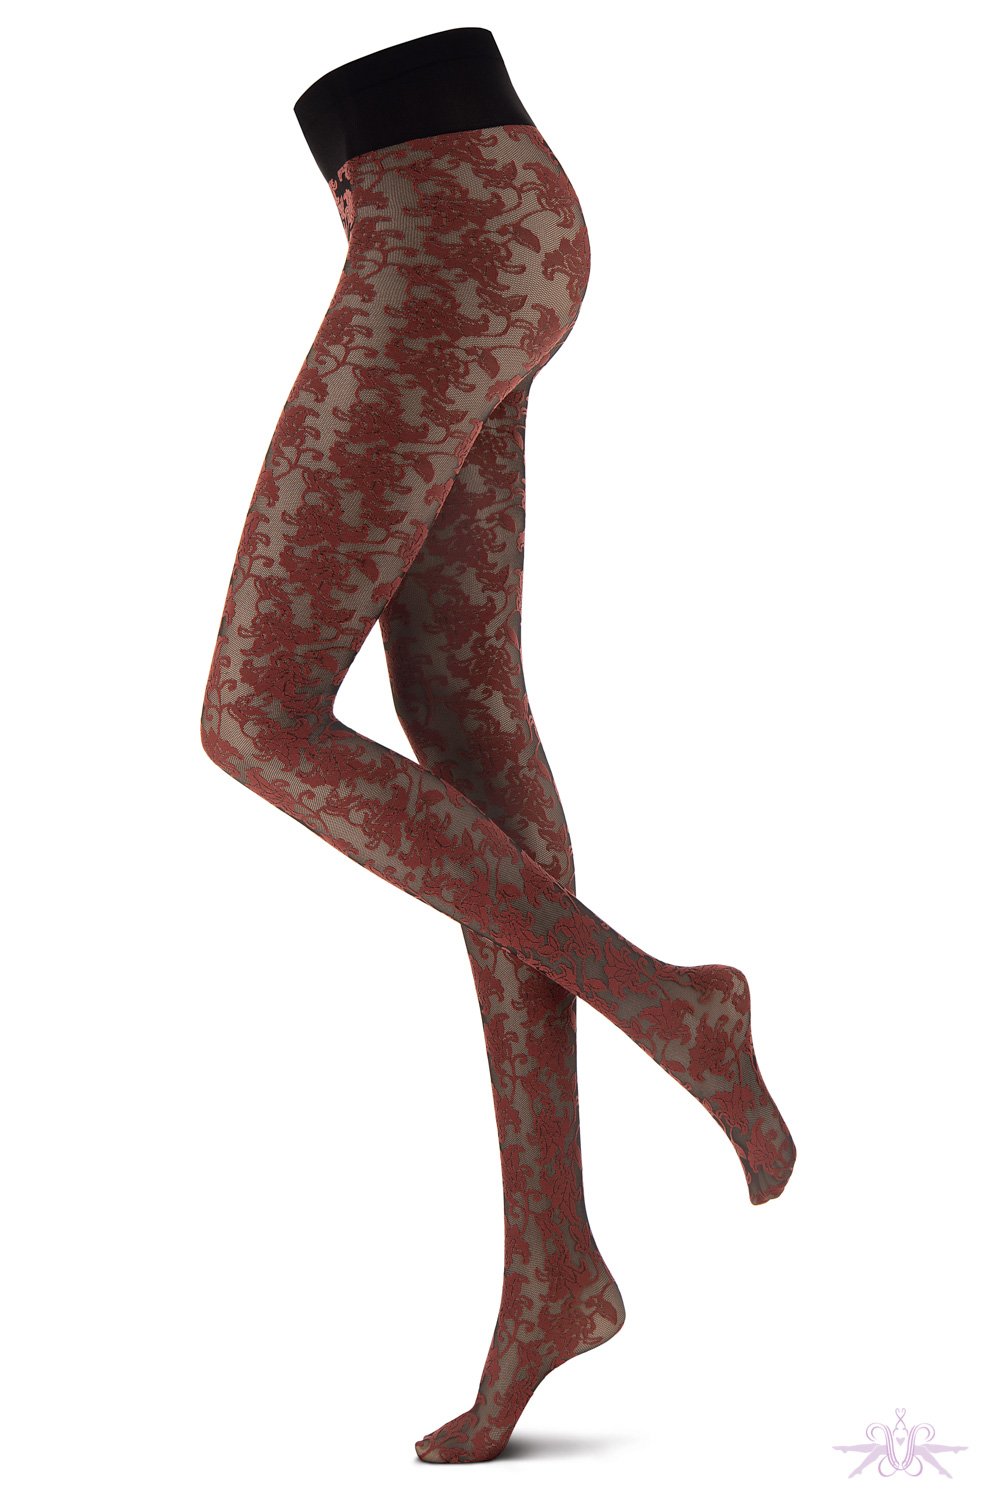 Oroblu Bicolour Lace Tights Fashion Tights for Autumn at the Hosiery Box -  The Hosiery Box